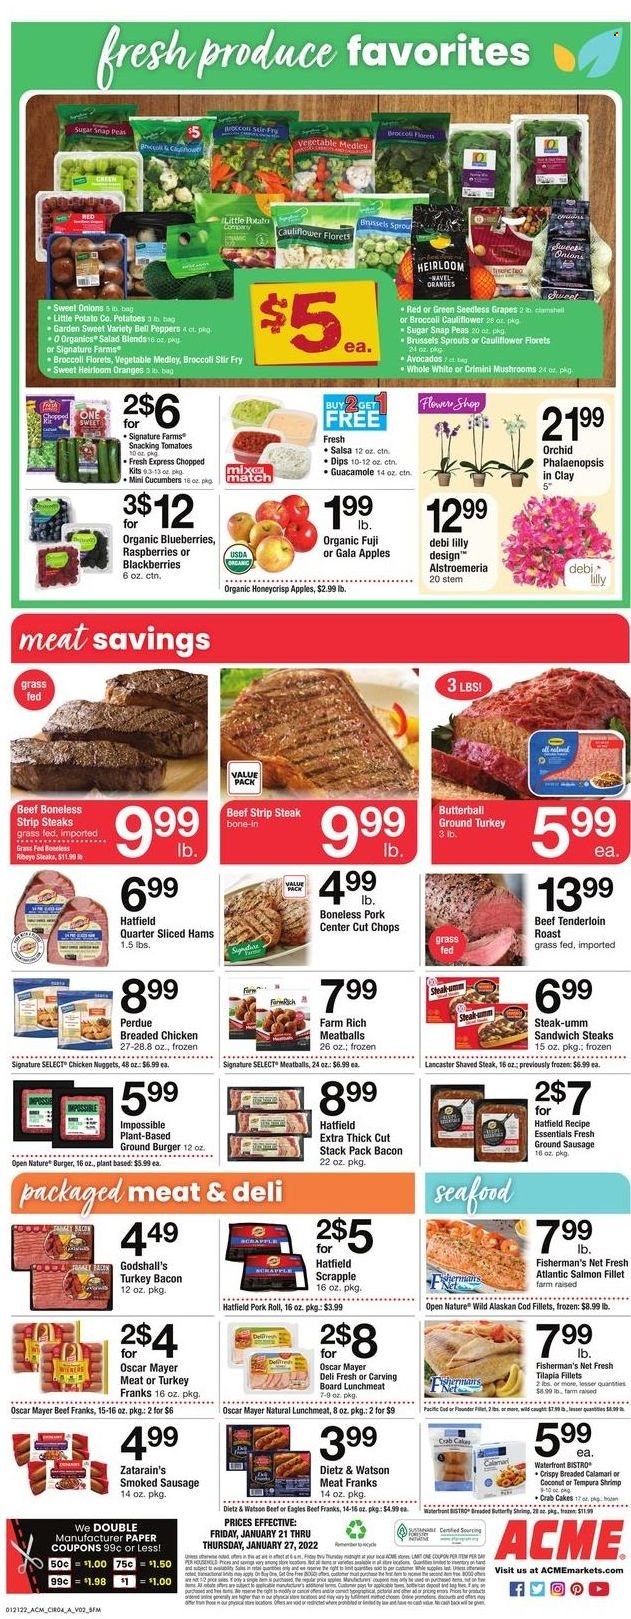 thumbnail - ACME Flyer - 01/21/2022 - 01/27/2022 - Sales products - seedless grapes, broccoli, cauliflower, cucumber, tomatoes, potatoes, onion, brussel sprouts, apples, blackberries, blueberries, Gala, grapes, oranges, calamari, cod, salmon, salmon fillet, tilapia, crab cake, meatballs, sandwich, nuggets, hamburger, fried chicken, chicken nuggets, Perdue®, bacon, Butterball, turkey bacon, Oscar Mayer, Dietz & Watson, sausage, smoked sausage, guacamole, lunch meat, snap peas, salsa, ground turkey, beef meat, steak, beef tenderloin, striploin steak, paper. Page 4.